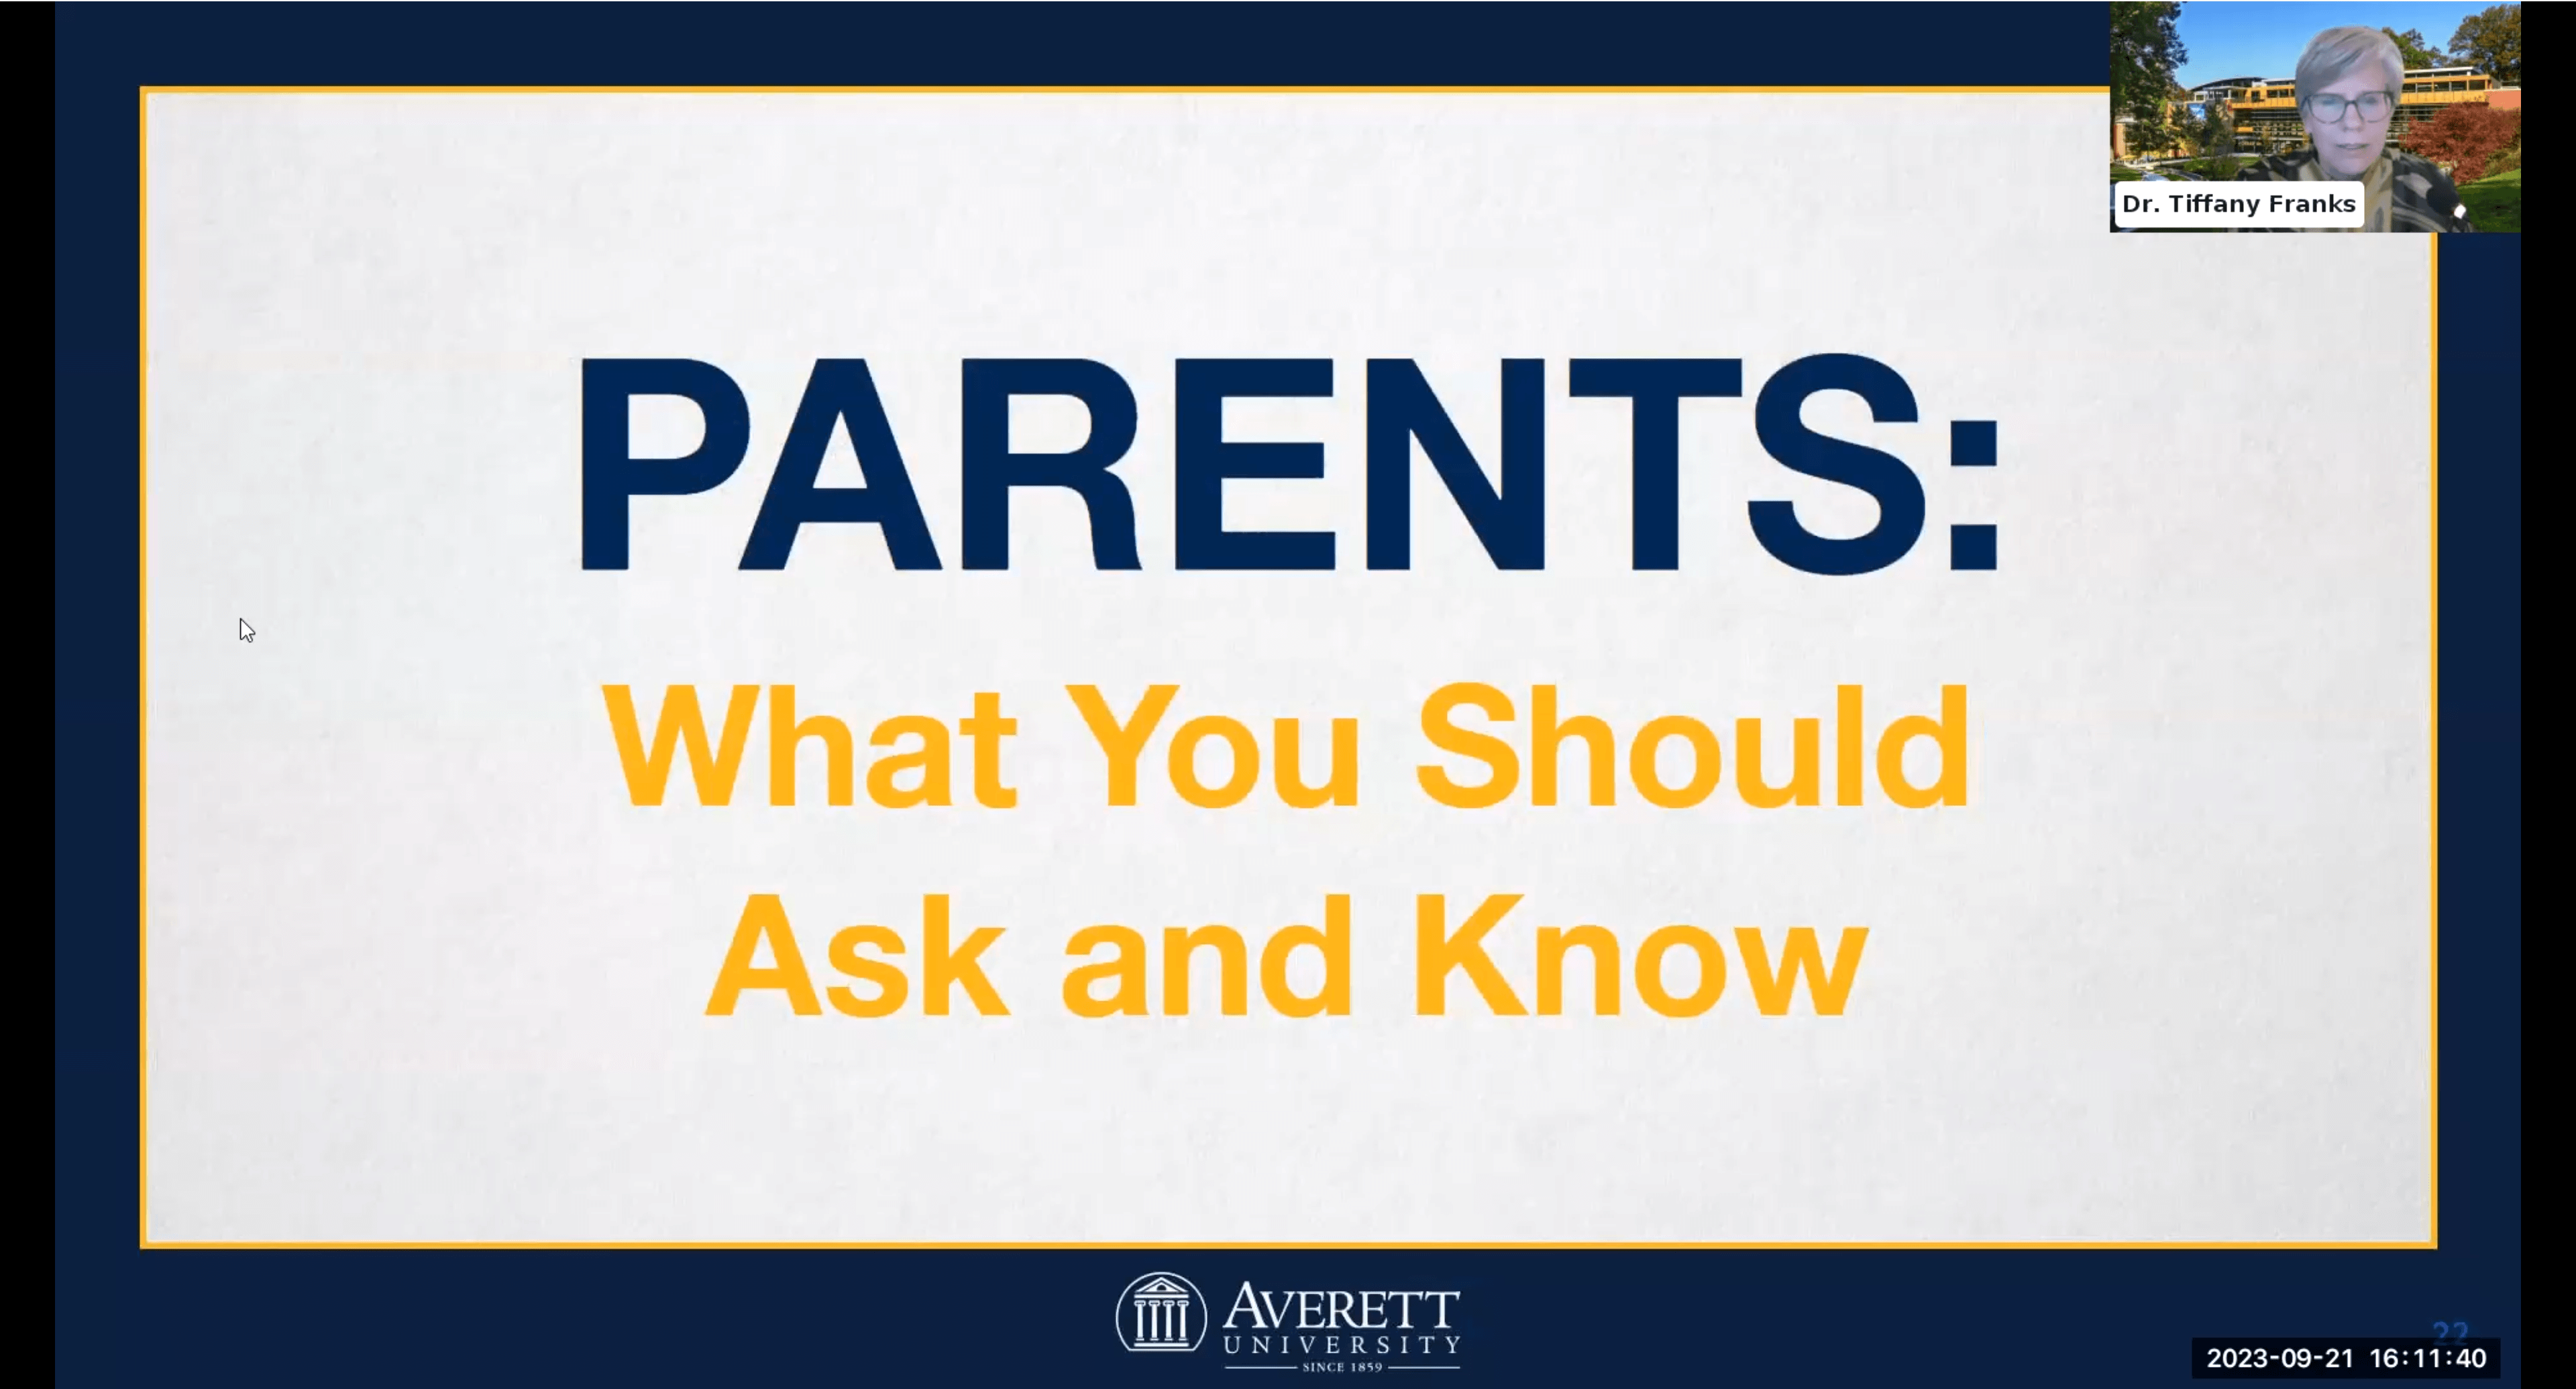 Parents and families, let's discuss the important questions you should ask.